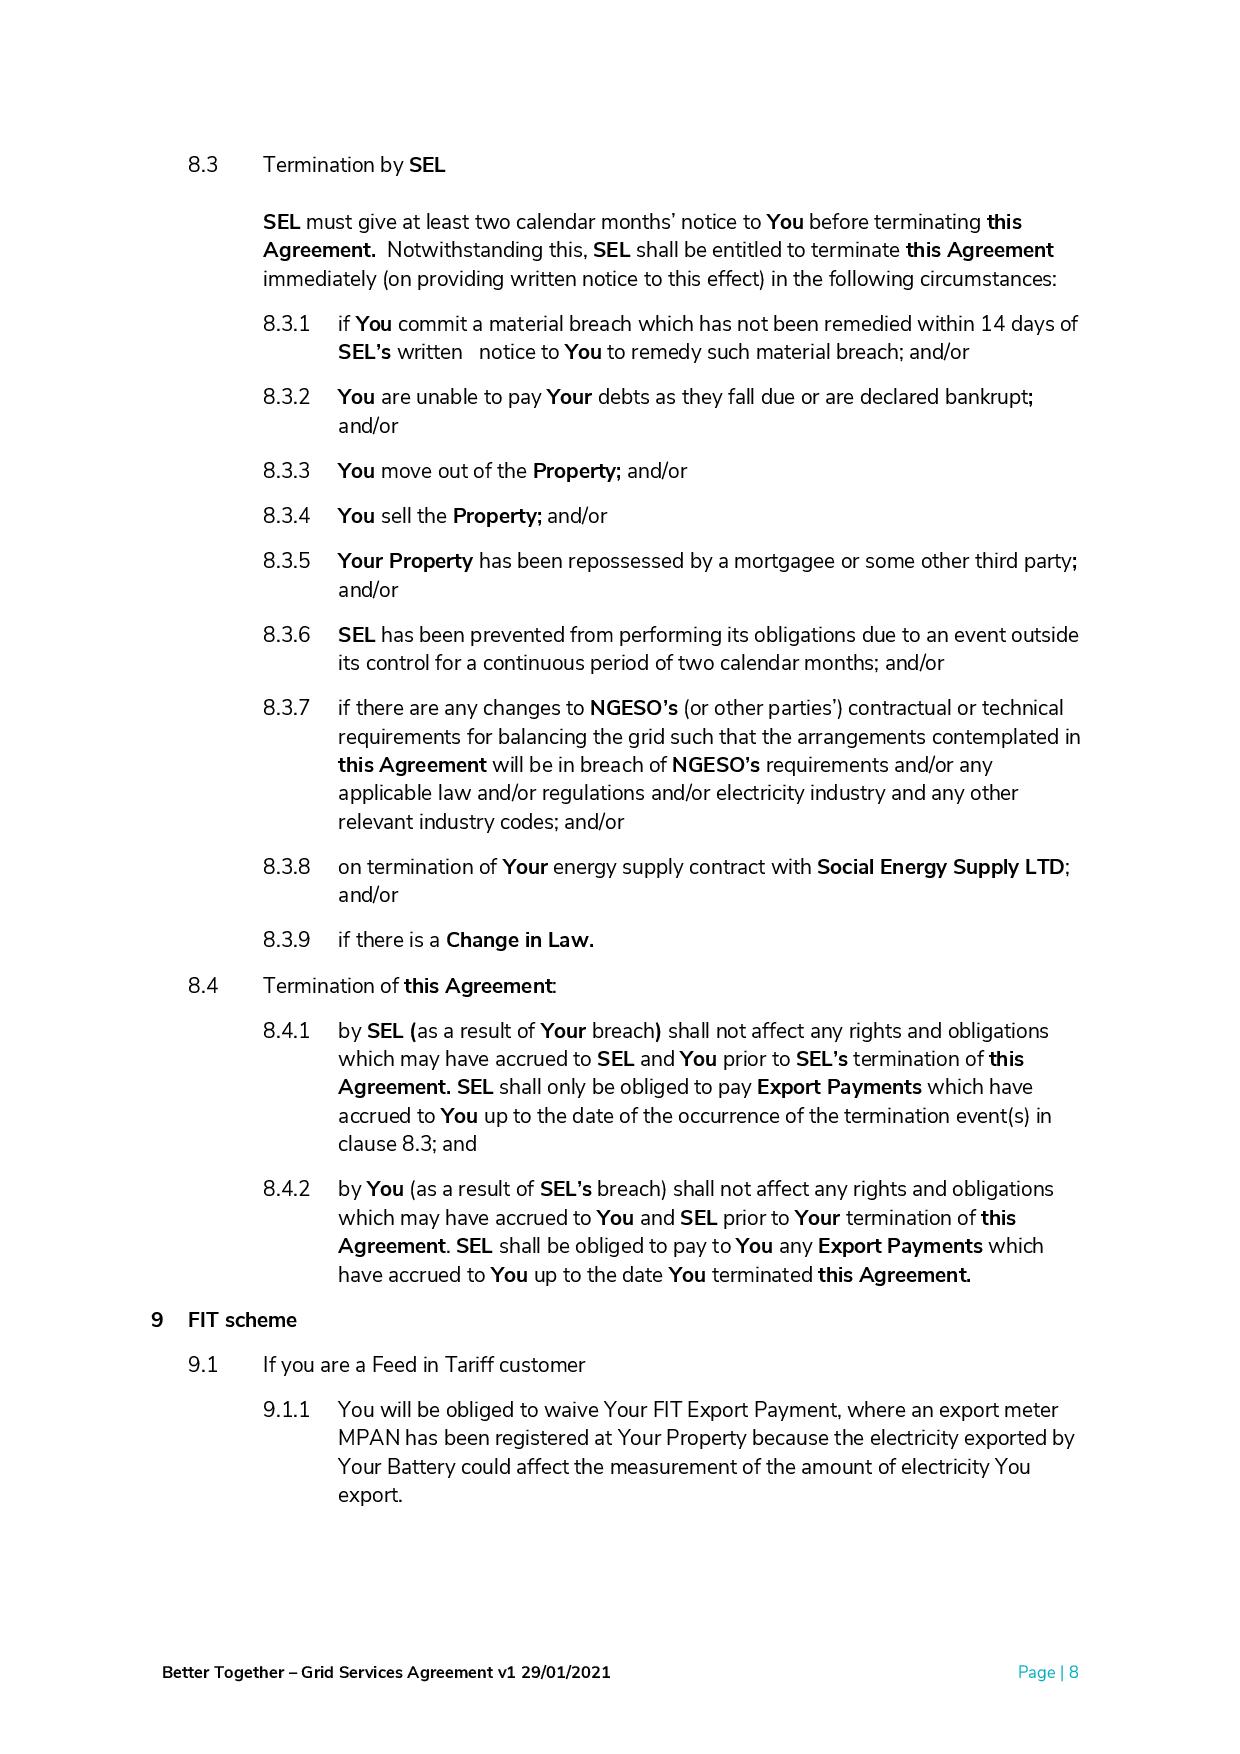 Better_Together_-_Grid_Services_Agreement-page-009.jpg